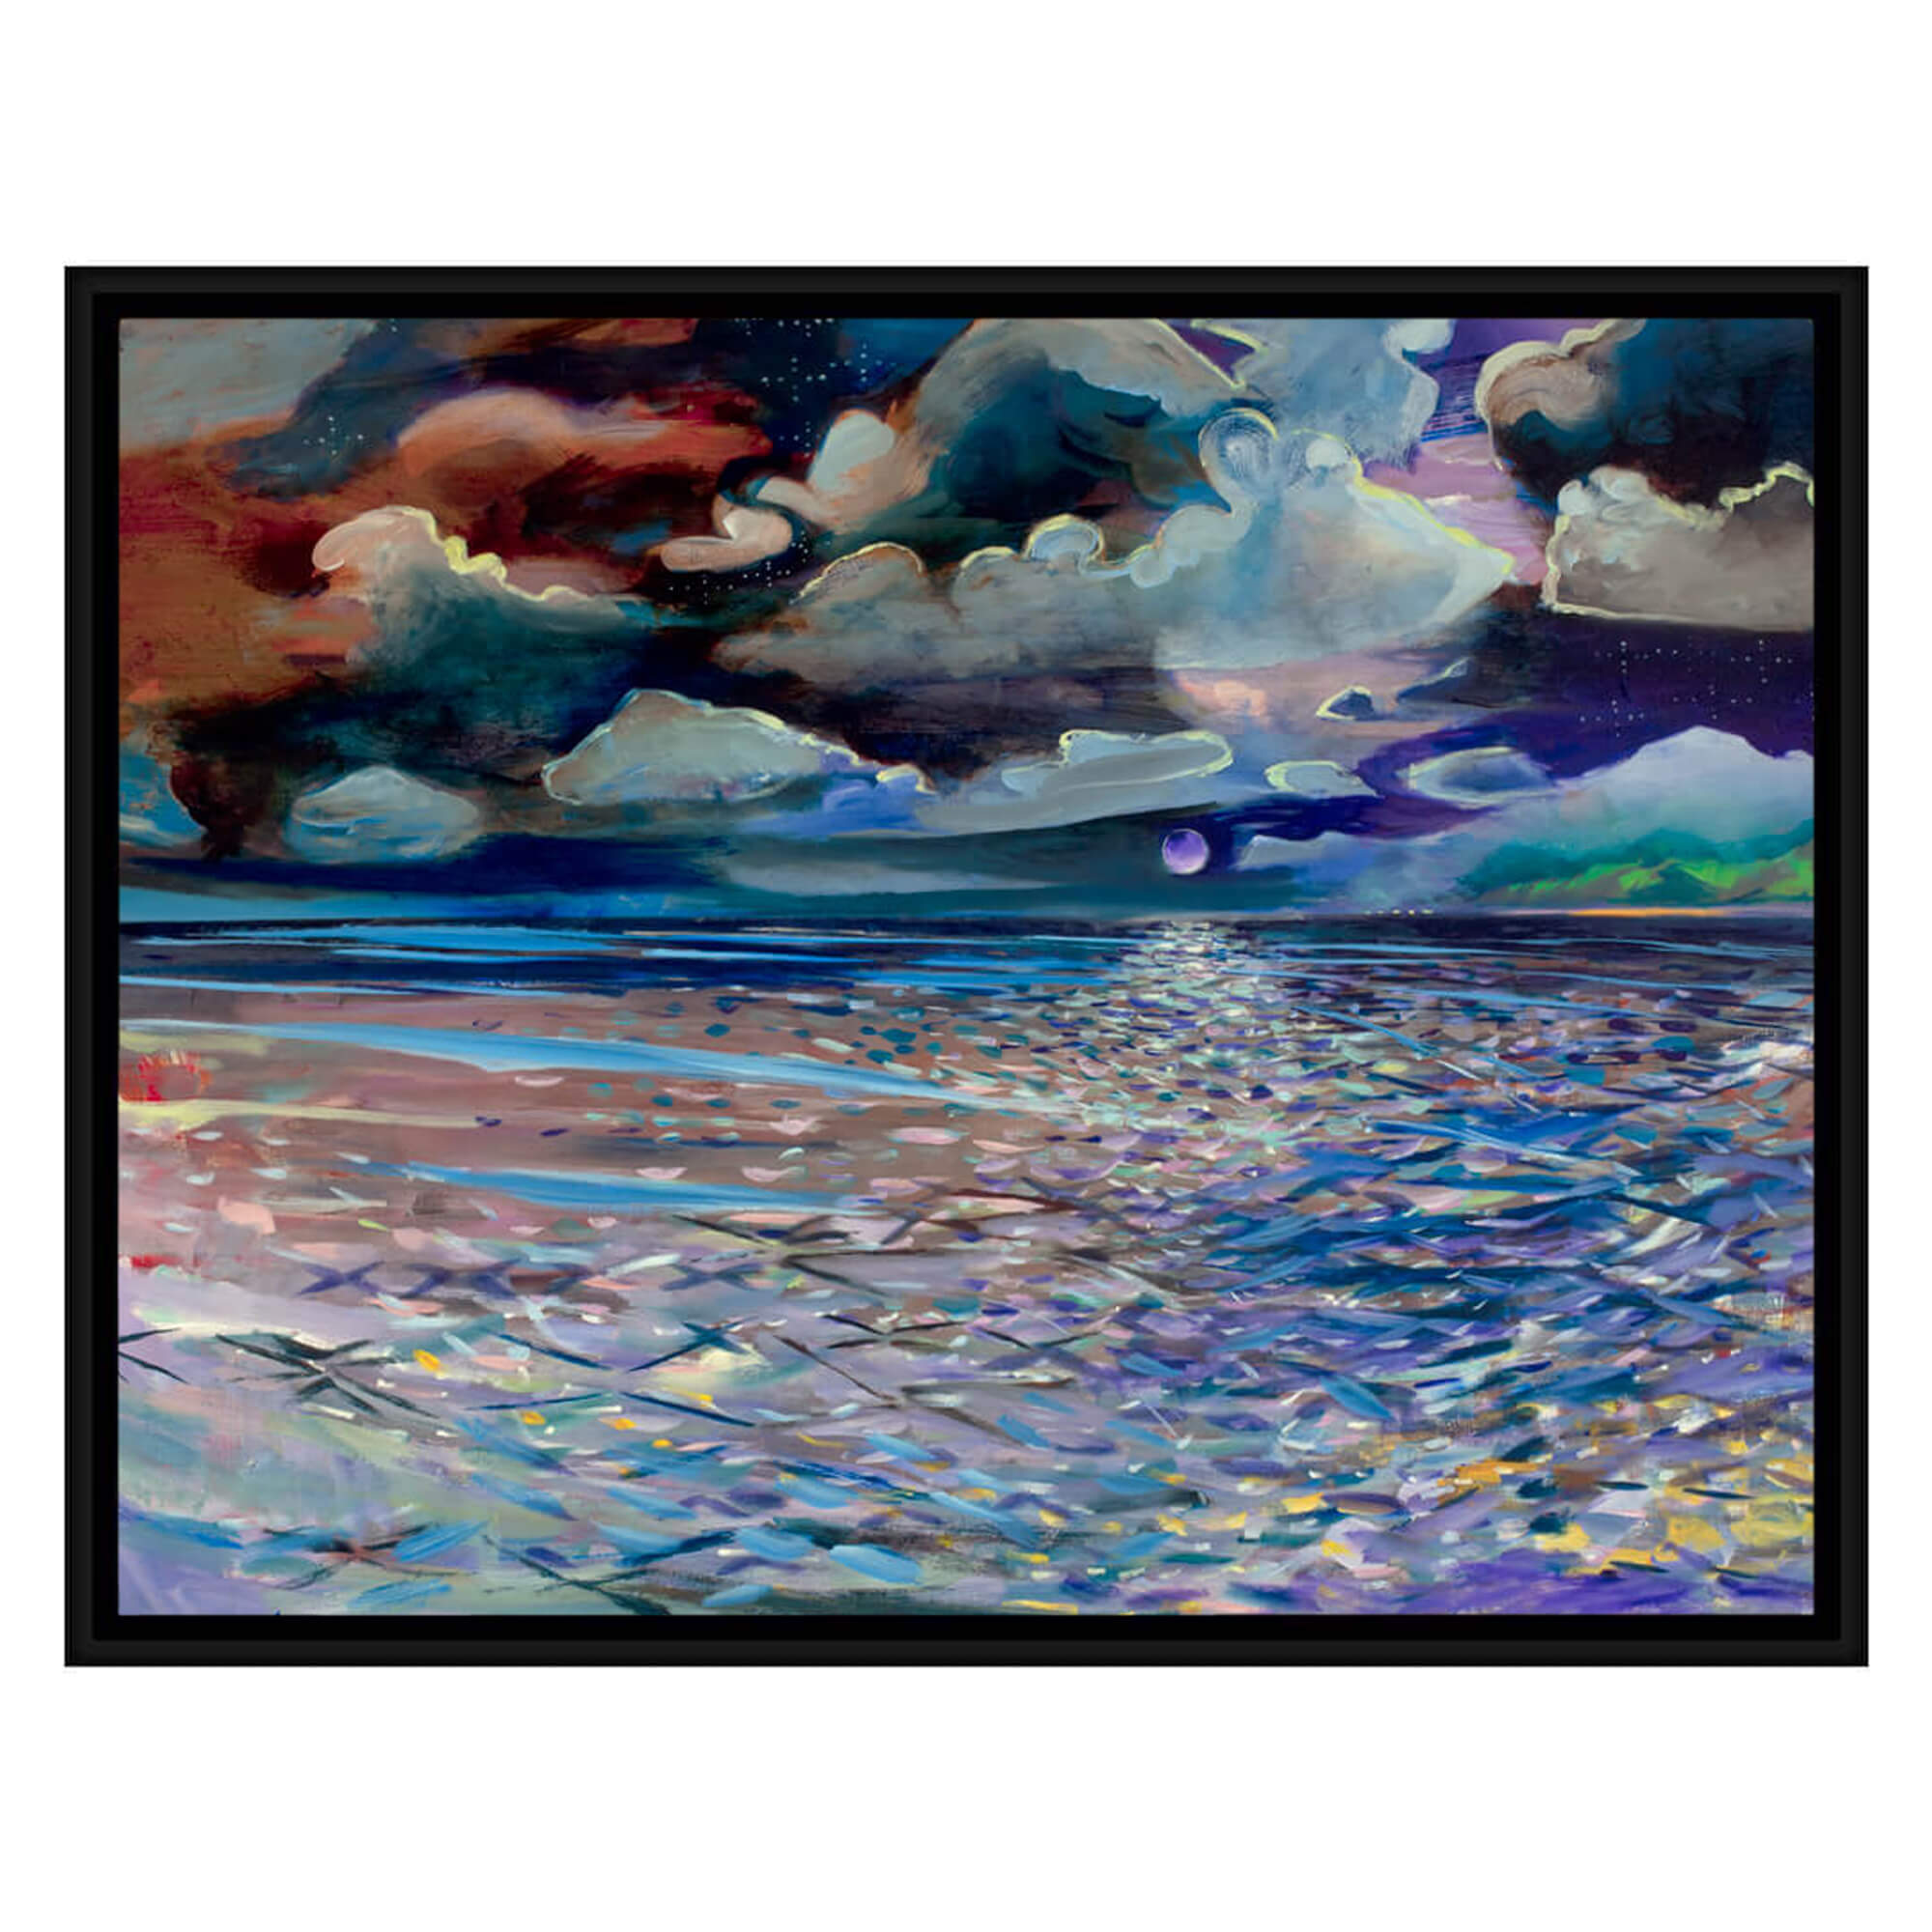 Framed canvas art print of an abstract artwork depicting a full moon and a colorful seascape by Hawaii artist Saumolia Puapuaga